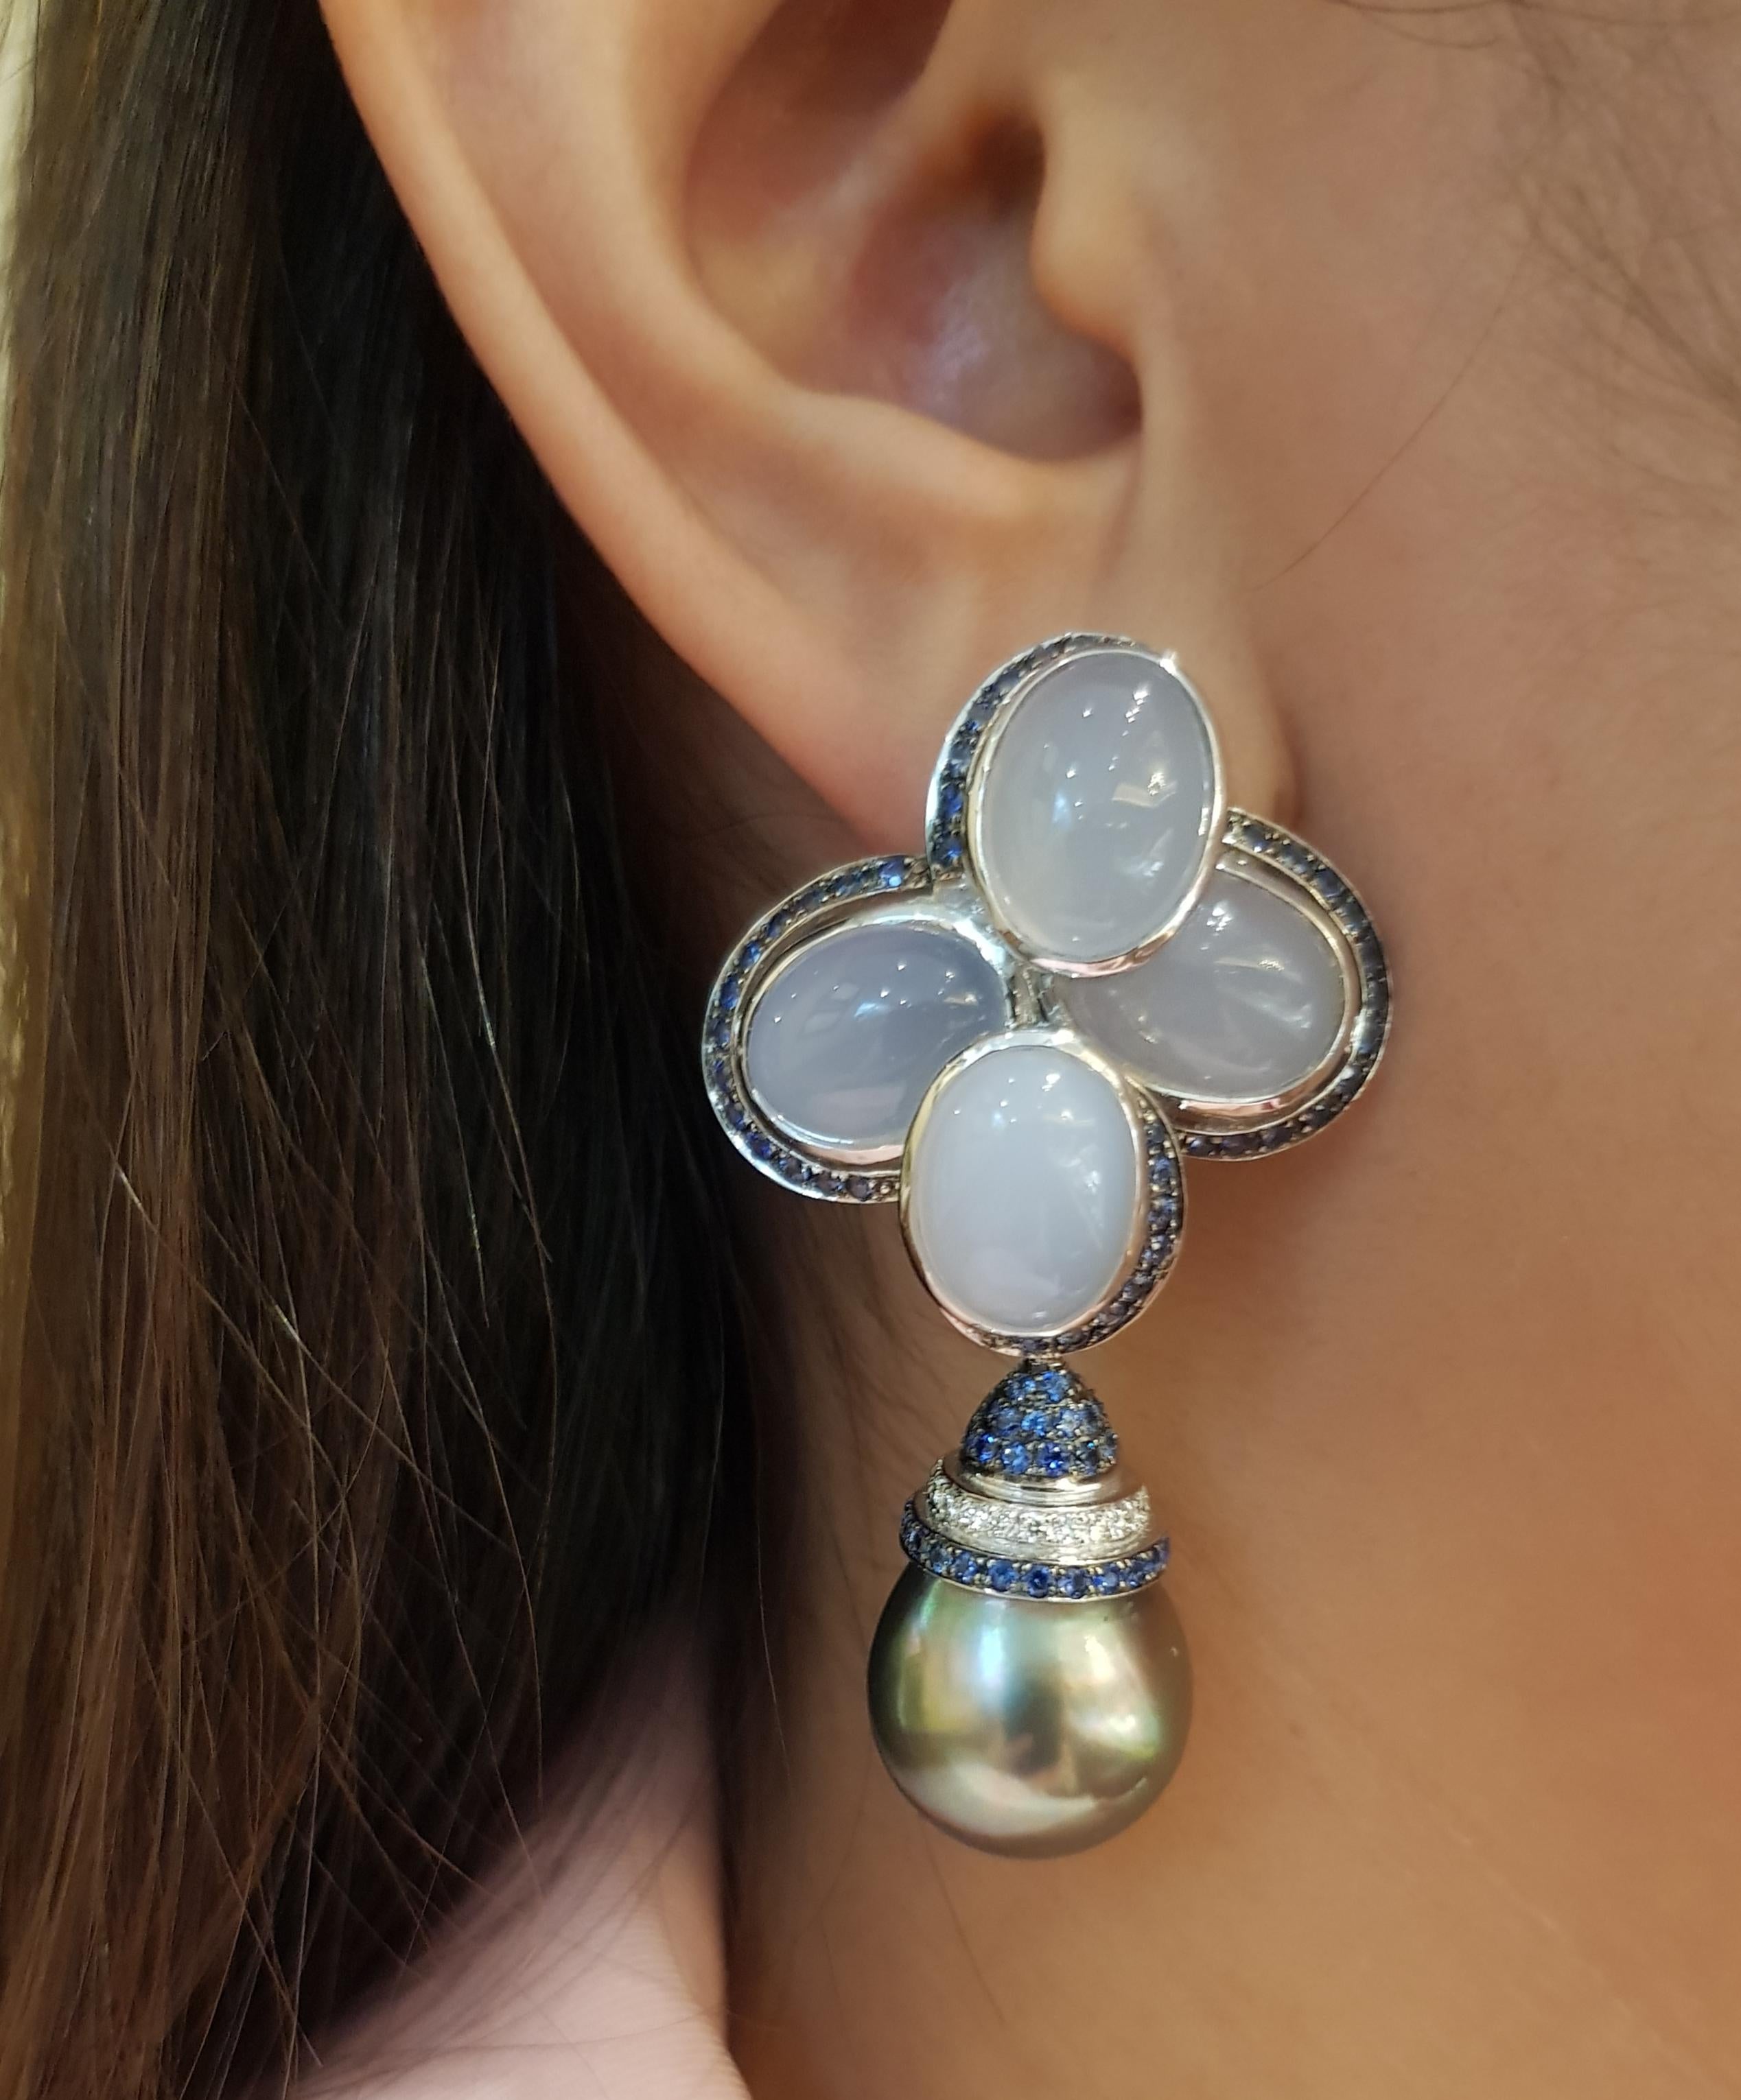 South Sea Pearl, Chalcedony 30.98 carats, Blue Sapphire 2.19 carats and Diamond 0.21 carat Earrings set in 18 Karat White Gold Settings

Width:  3.1 cm 
Length:  5.2 cm
Total Weight: 37.62 grams

